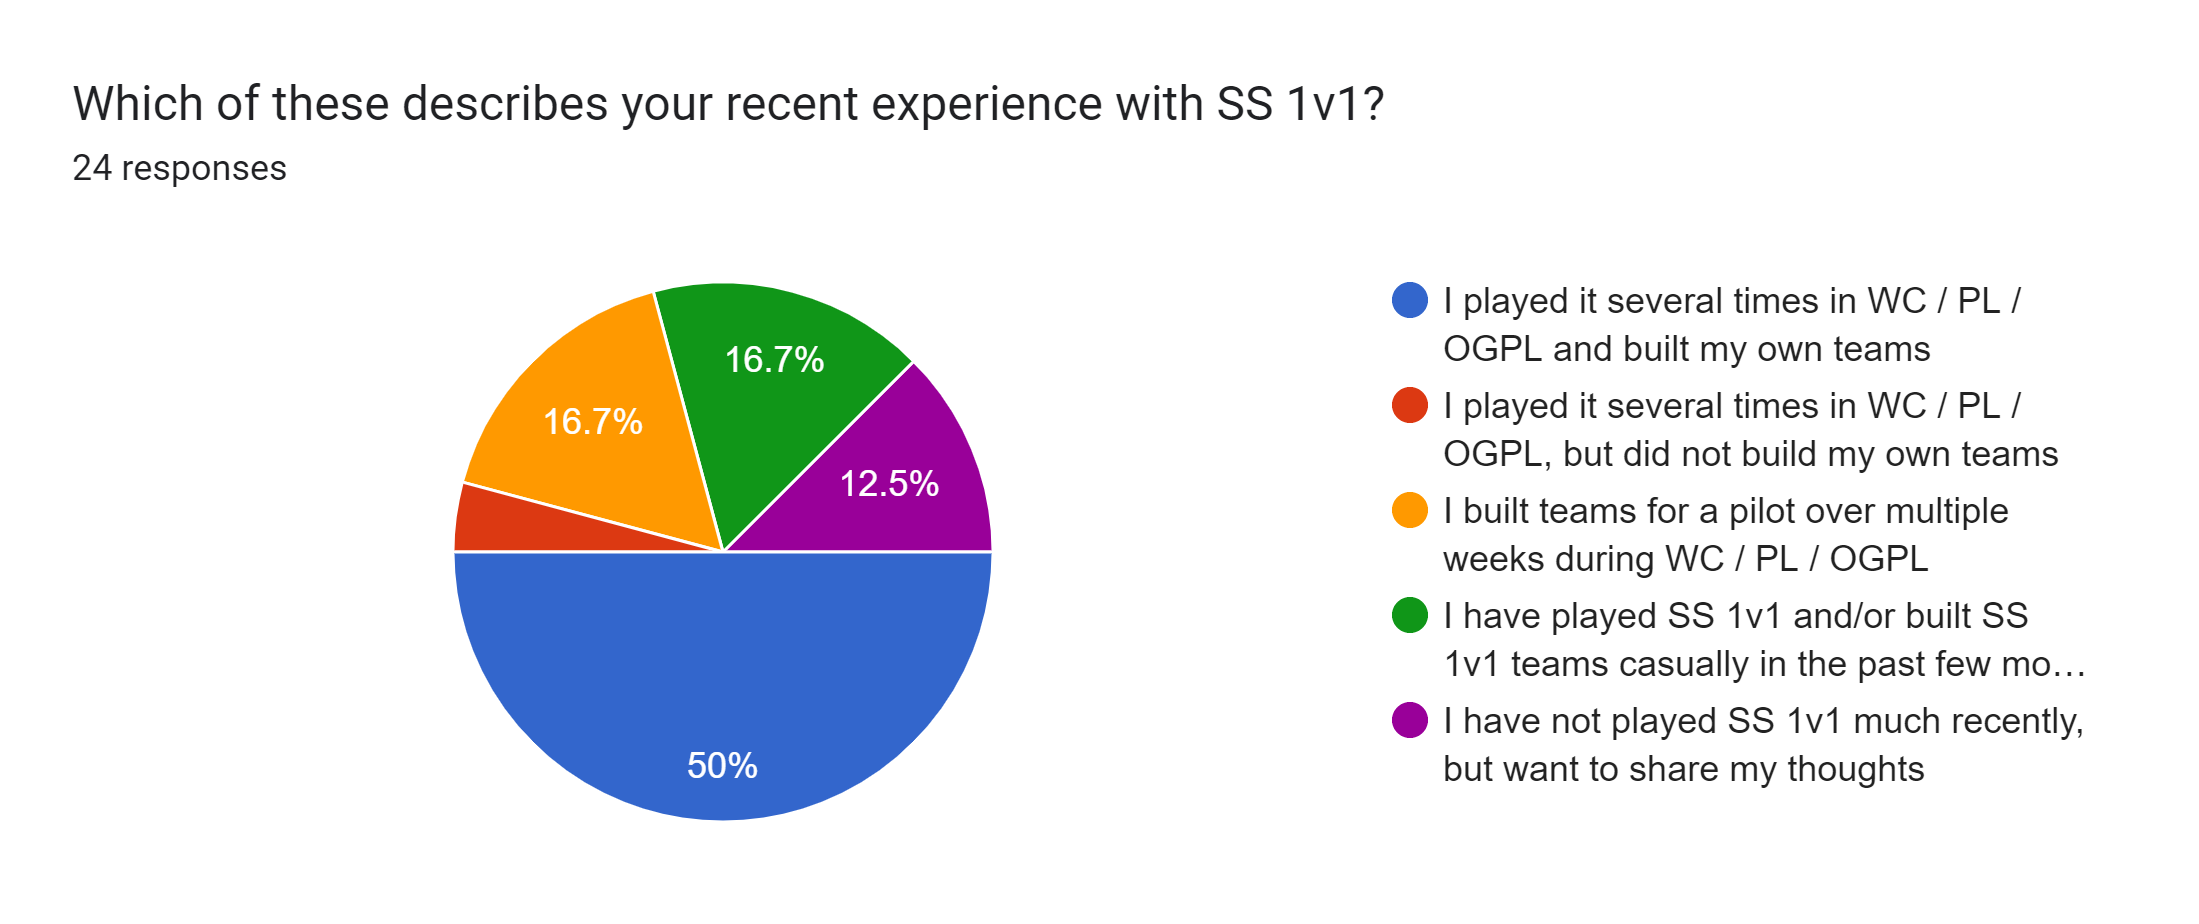 Forms response chart. Question title: Which of these describes your recent experience with SS 1v1?. Number of responses: 24 responses.